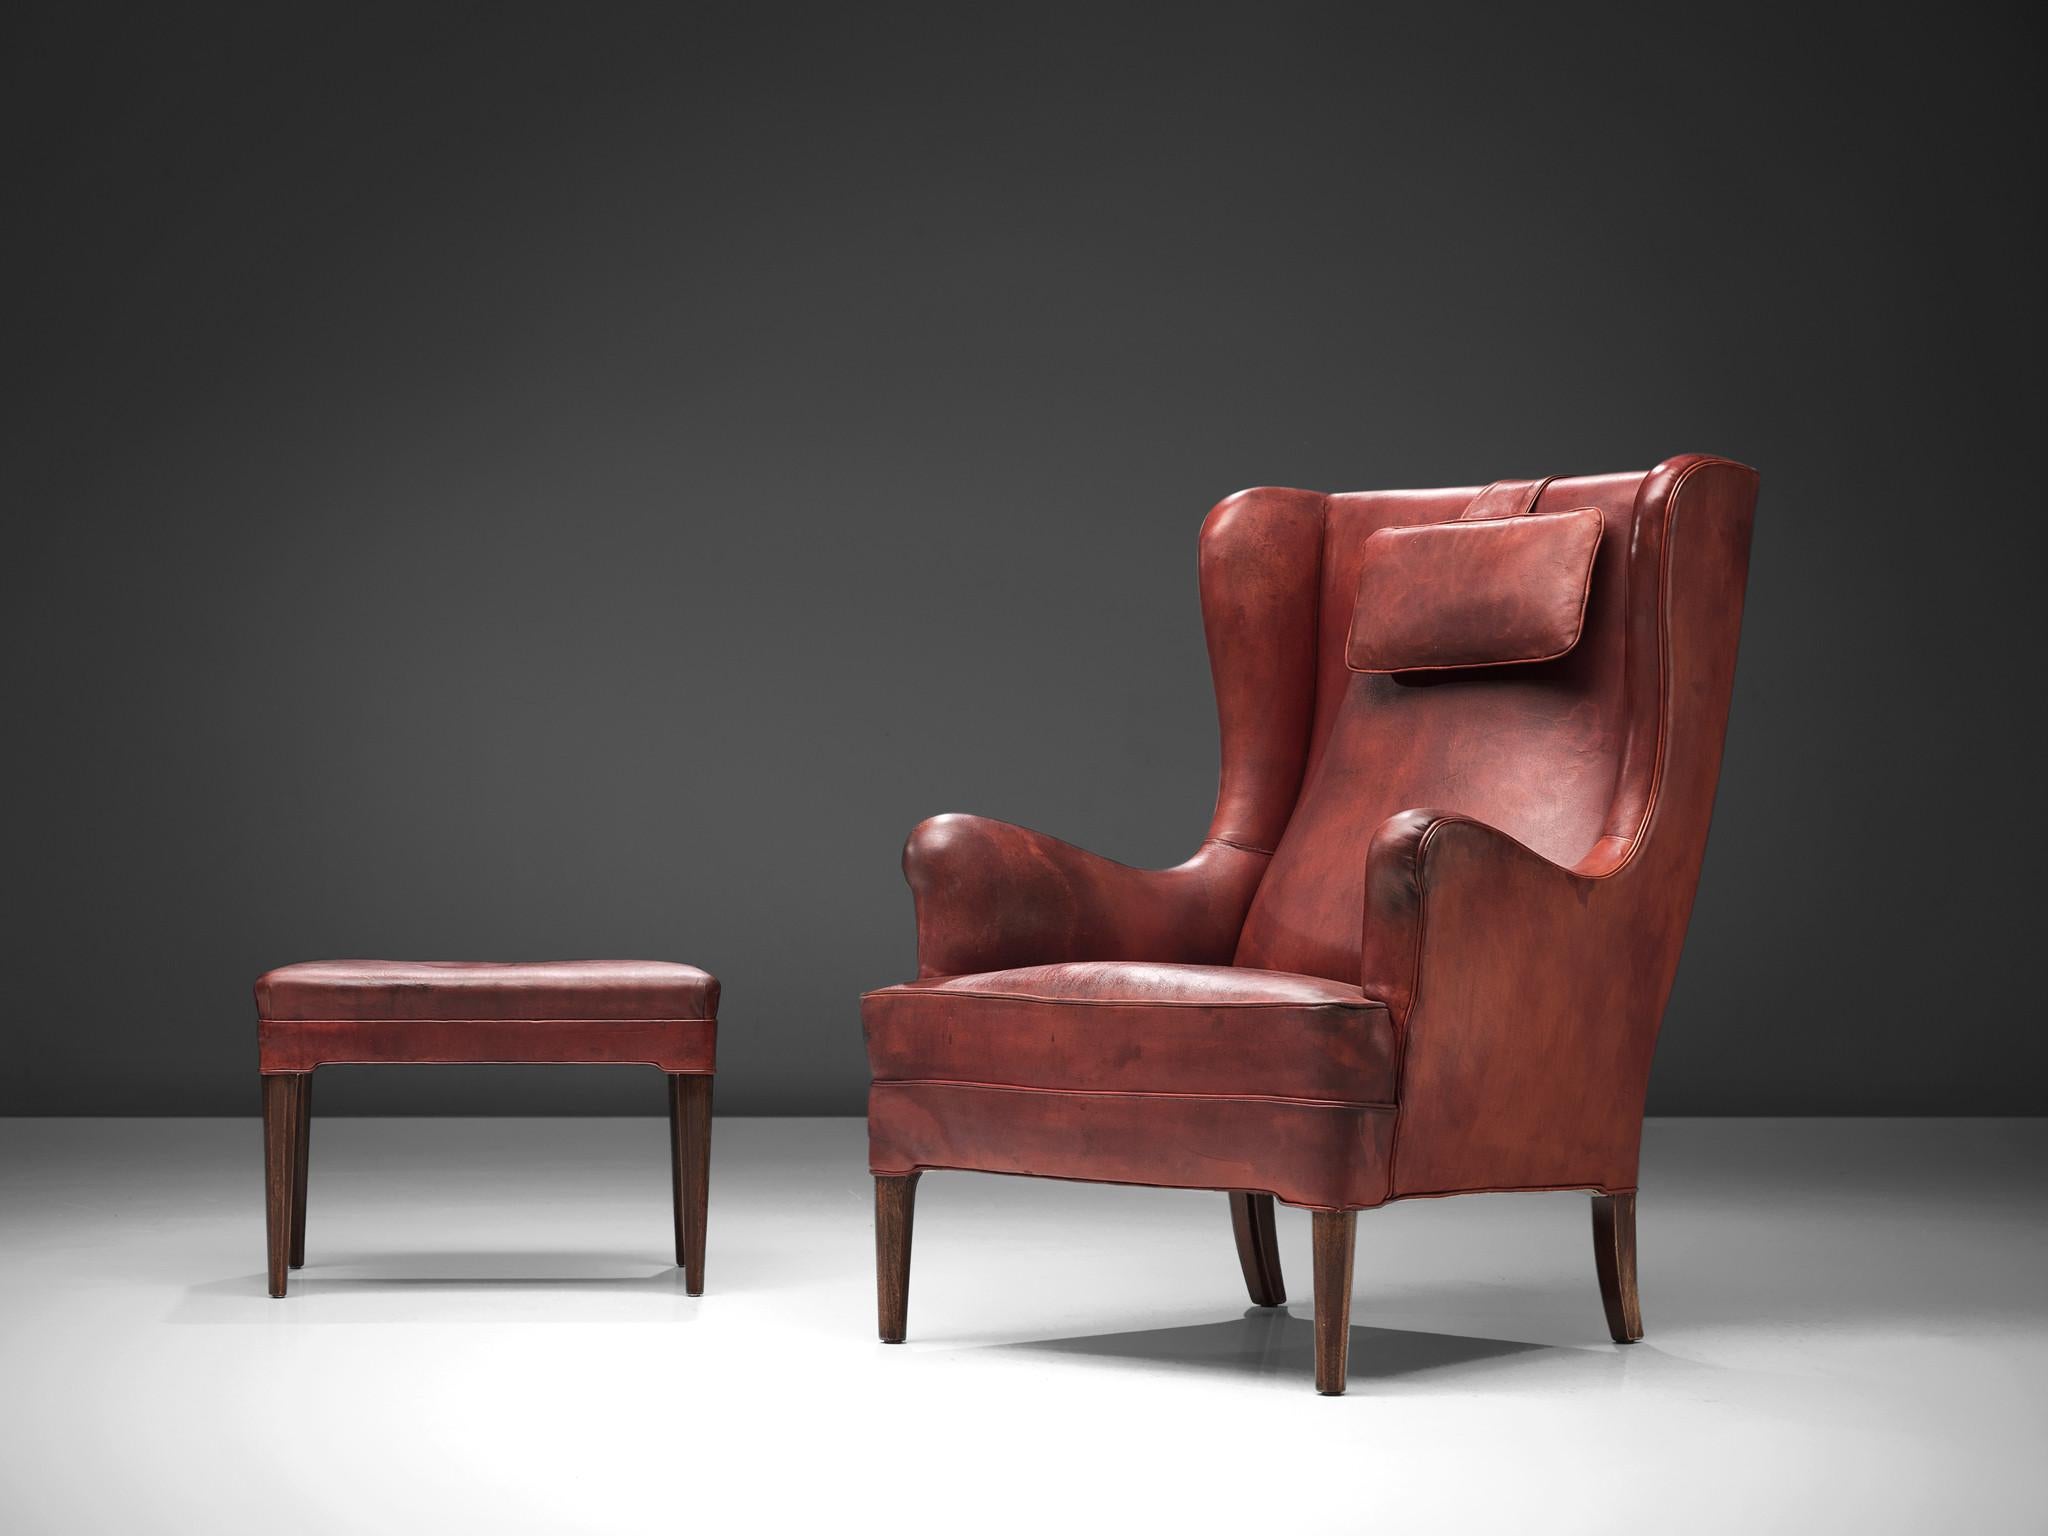 Frits Henningsen, wingback chair and ottoman, leather, wood, Denmark, 1940s.

Refined and timeless, the classical wingback chair by Frits Henningsen embodies elegance and comfort. Crafted with meticulous attention to detail, this chair, accompanied